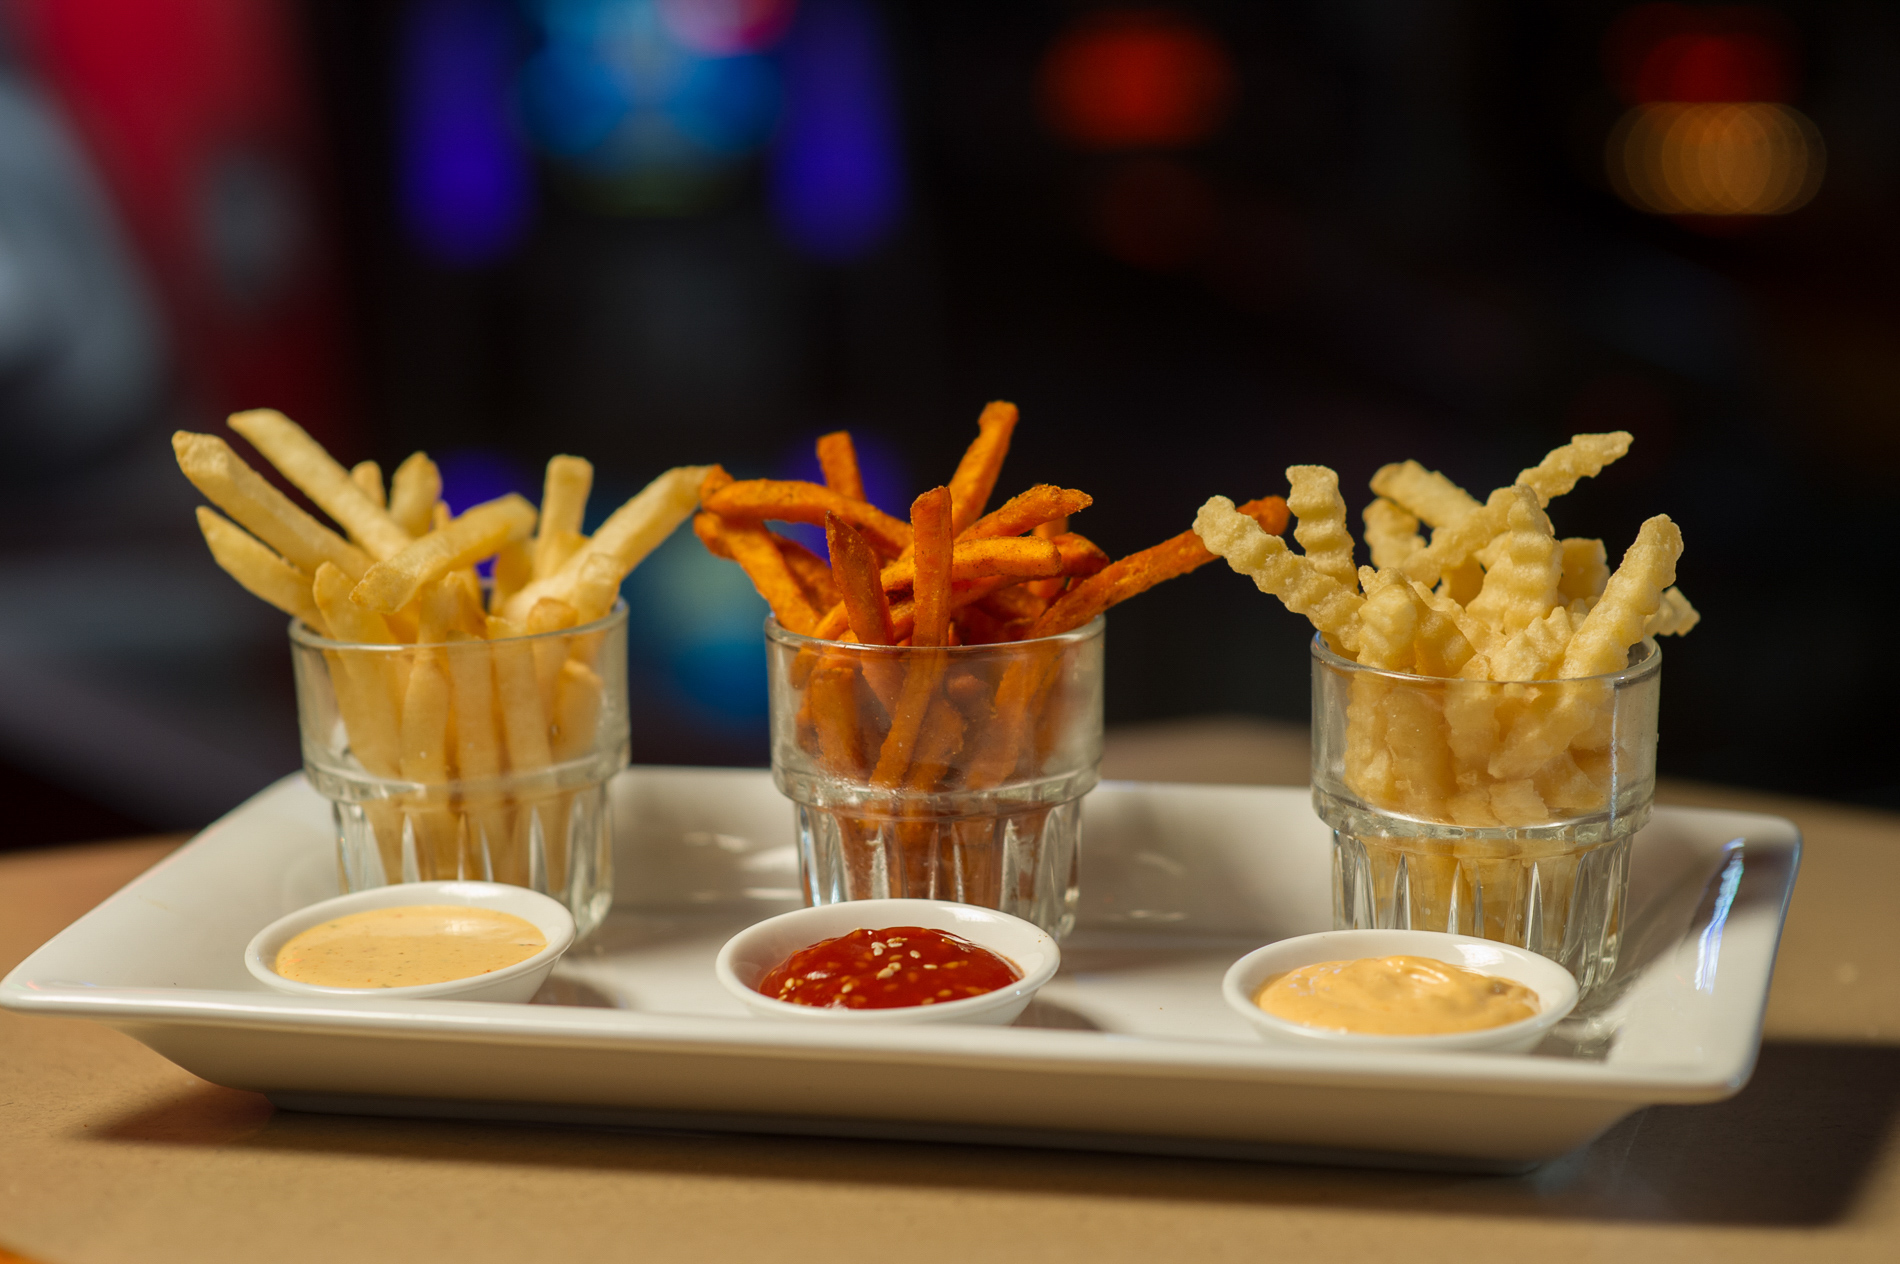 A Variety of Fries